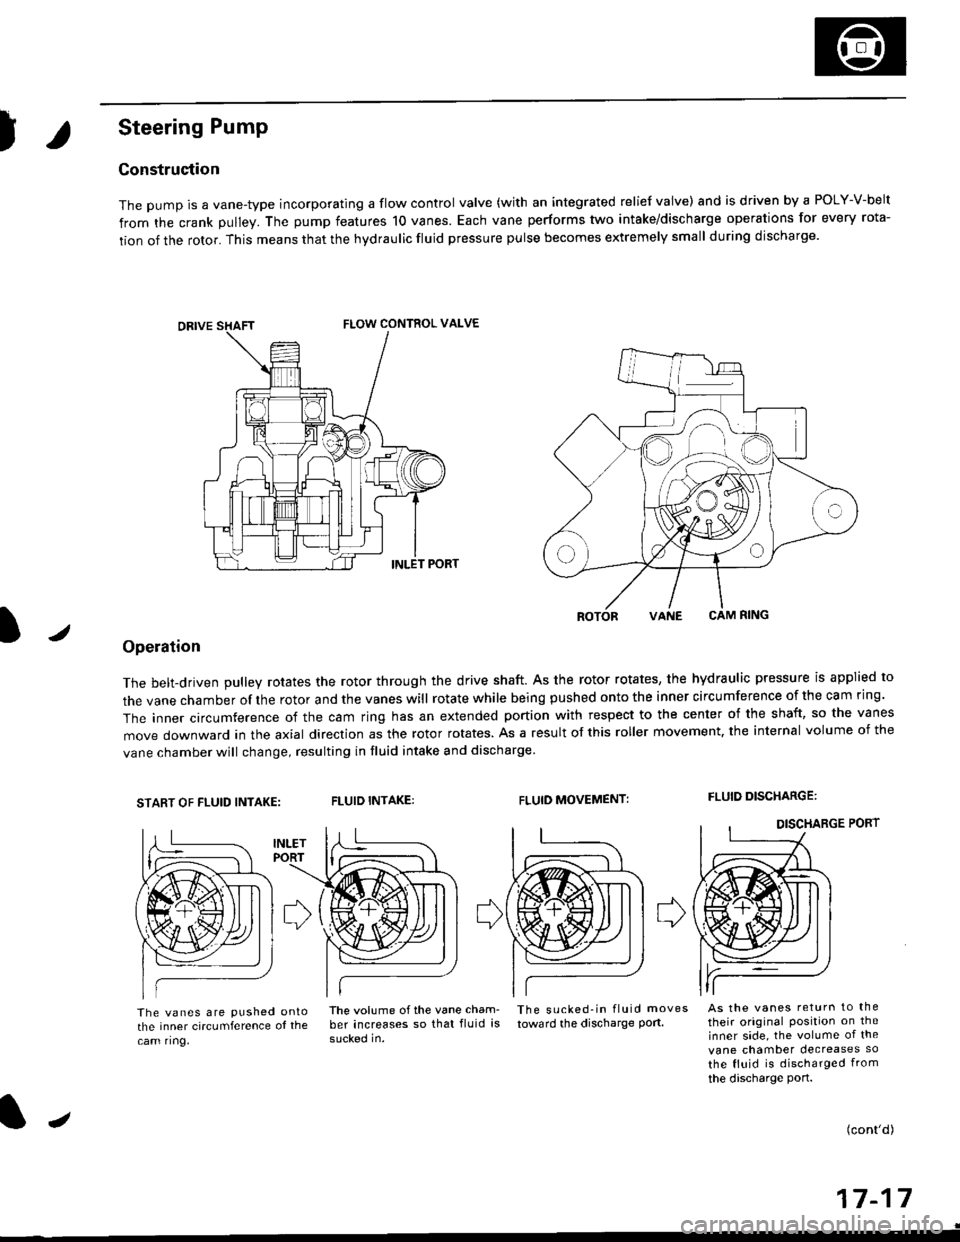 HONDA CIVIC 1998 6.G Workshop Manual )
Steering Pump
Construction
The pump is a vane-type incorporating a flow control valve (with an integrated relief valve) and is driven by a POLY-V-belt
from the crank pulley. The pump features 10 van